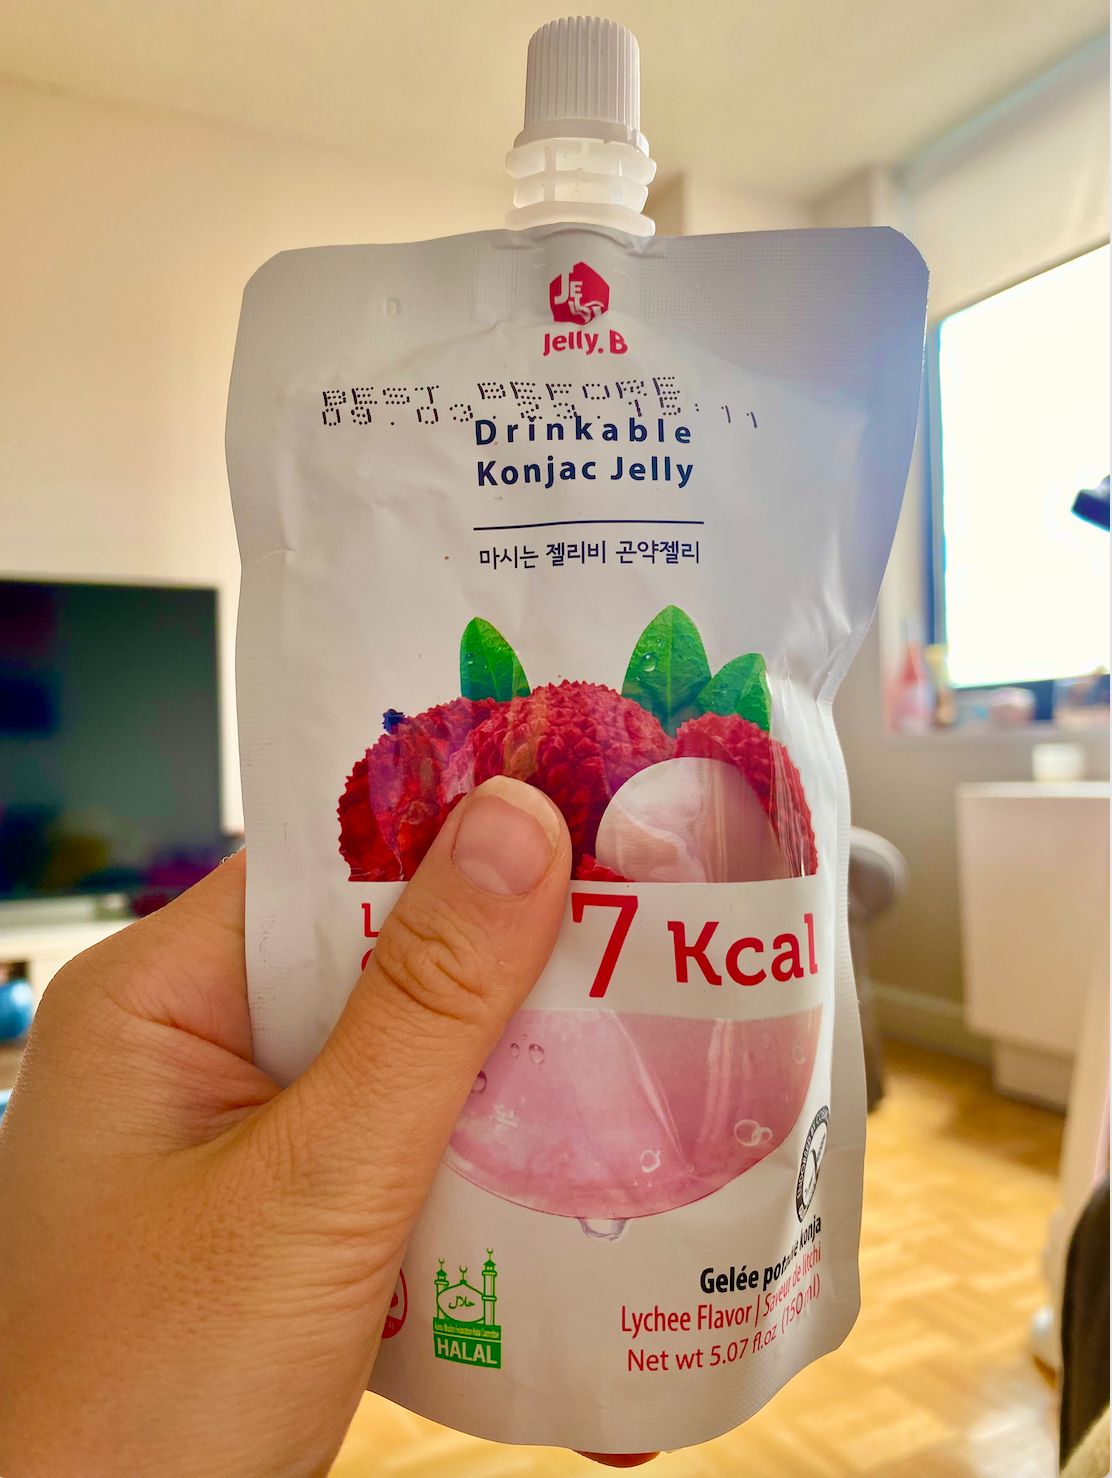 A pouch of lychee flavored drinkable jelly 